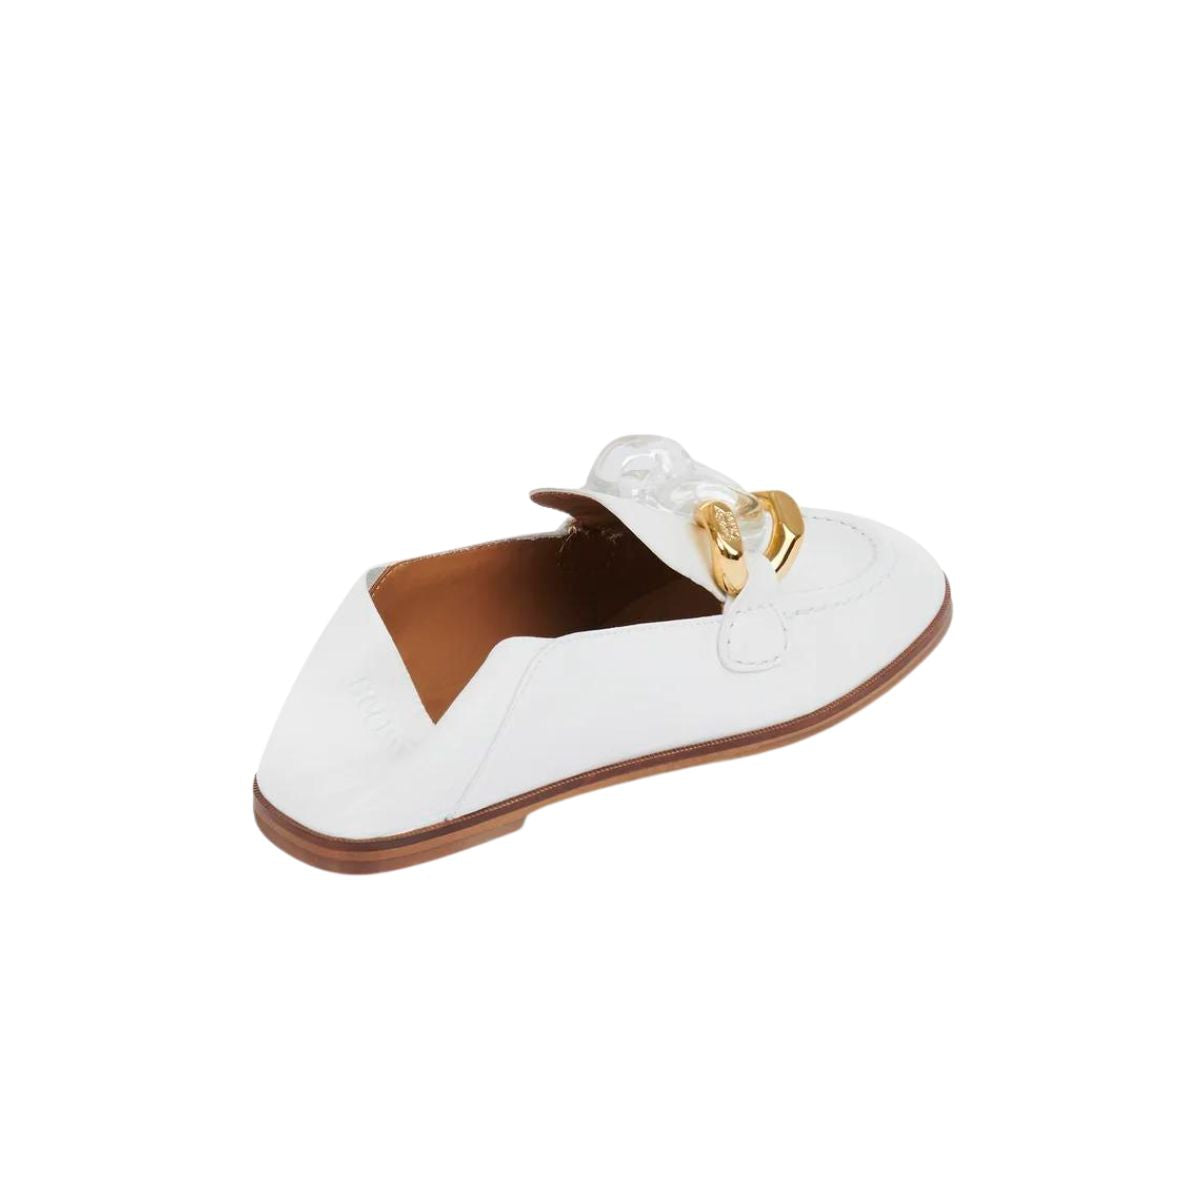 See by Chloe Monyca Loafer in White